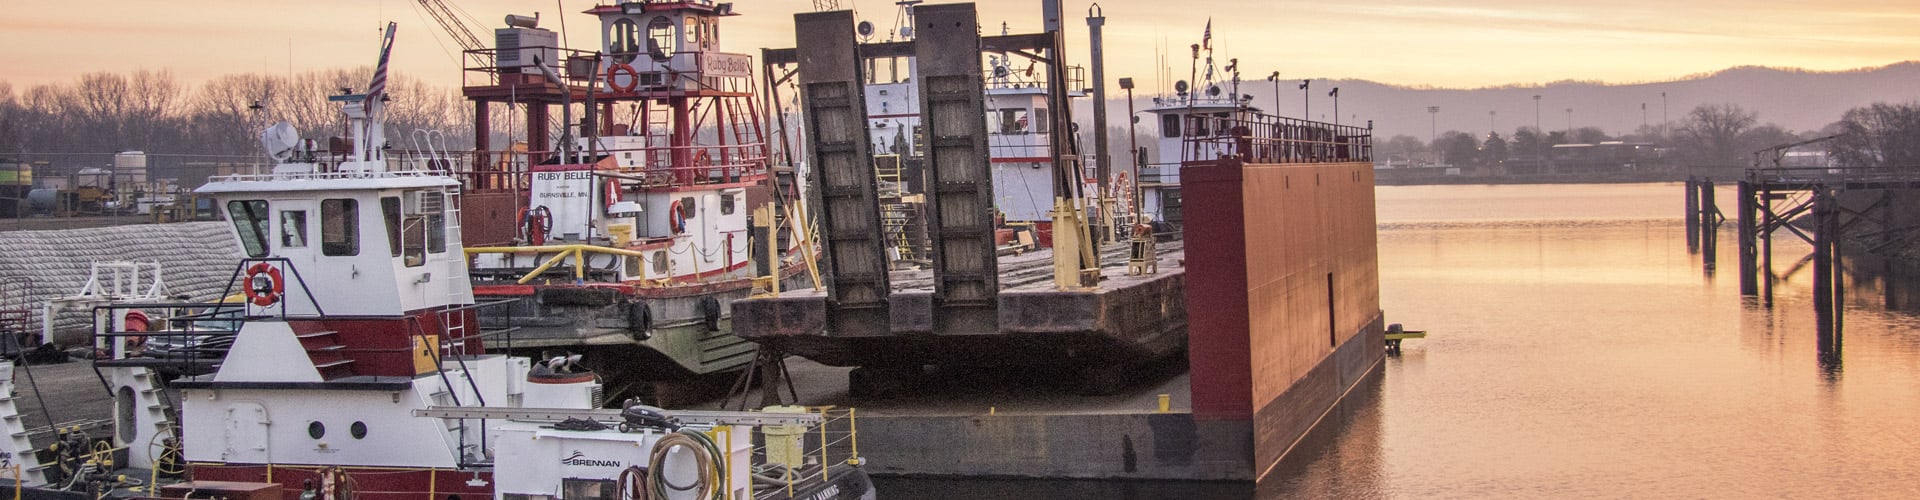 dry dock vessel repairs, inland river services, harbor management services, vessel repairs, dry dock services, upper mississippi river dry dock, barge repairs, towboat repairs, steamboat repairs